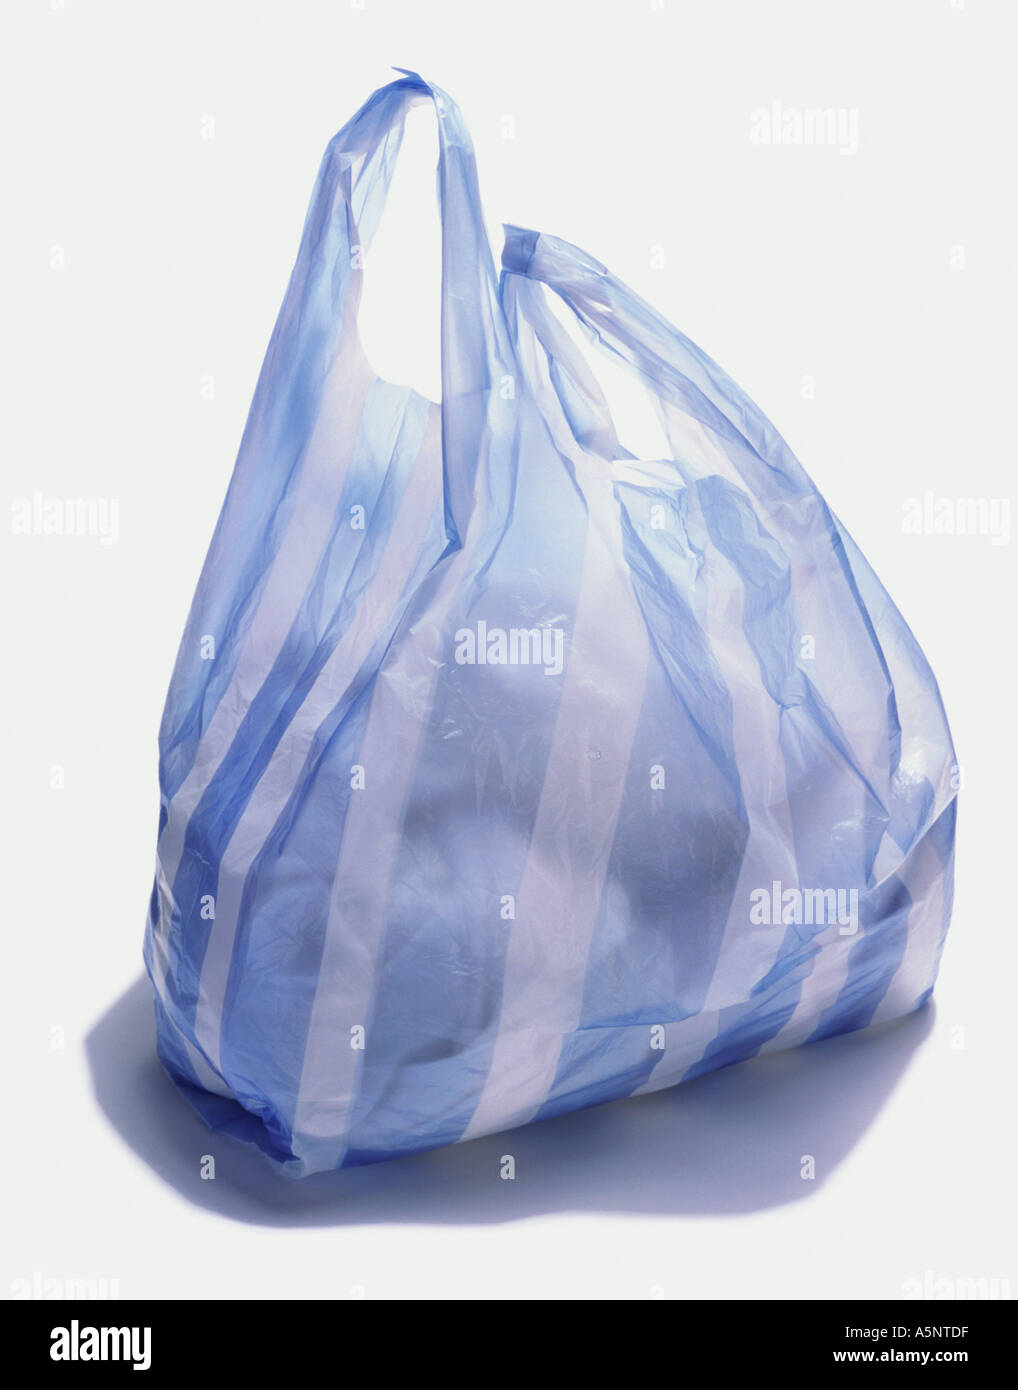 A blue and white striped plastic bag Stock Photo